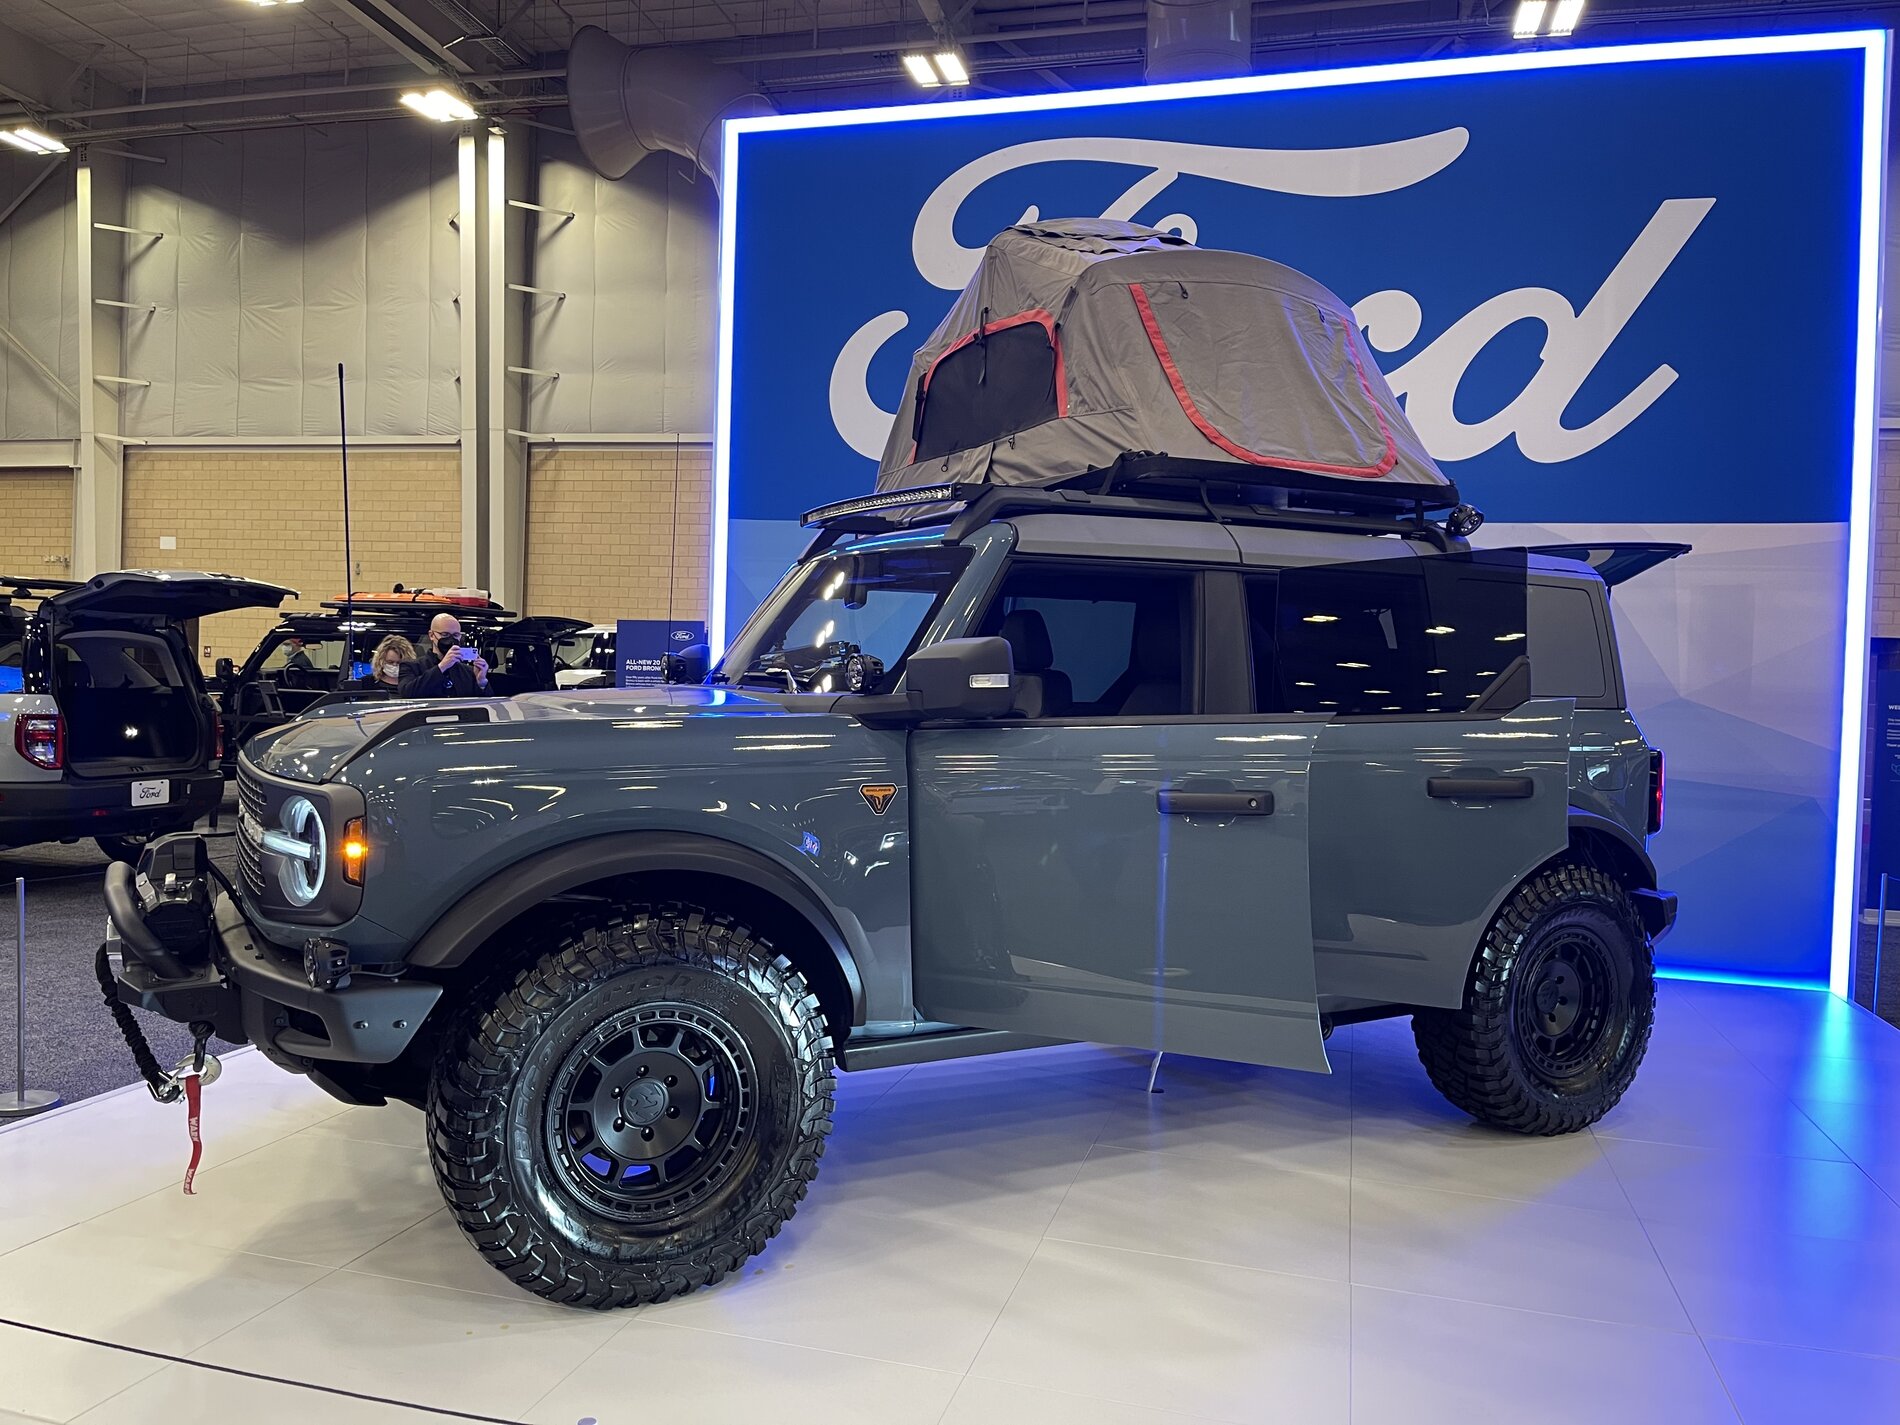 Ford Bronco Pics & Videos From OKC Show: 2-Door Trail Concept and Overland Concept Broncos 2A514946-C1E2-4D94-87D3-3FE6958C0CDC